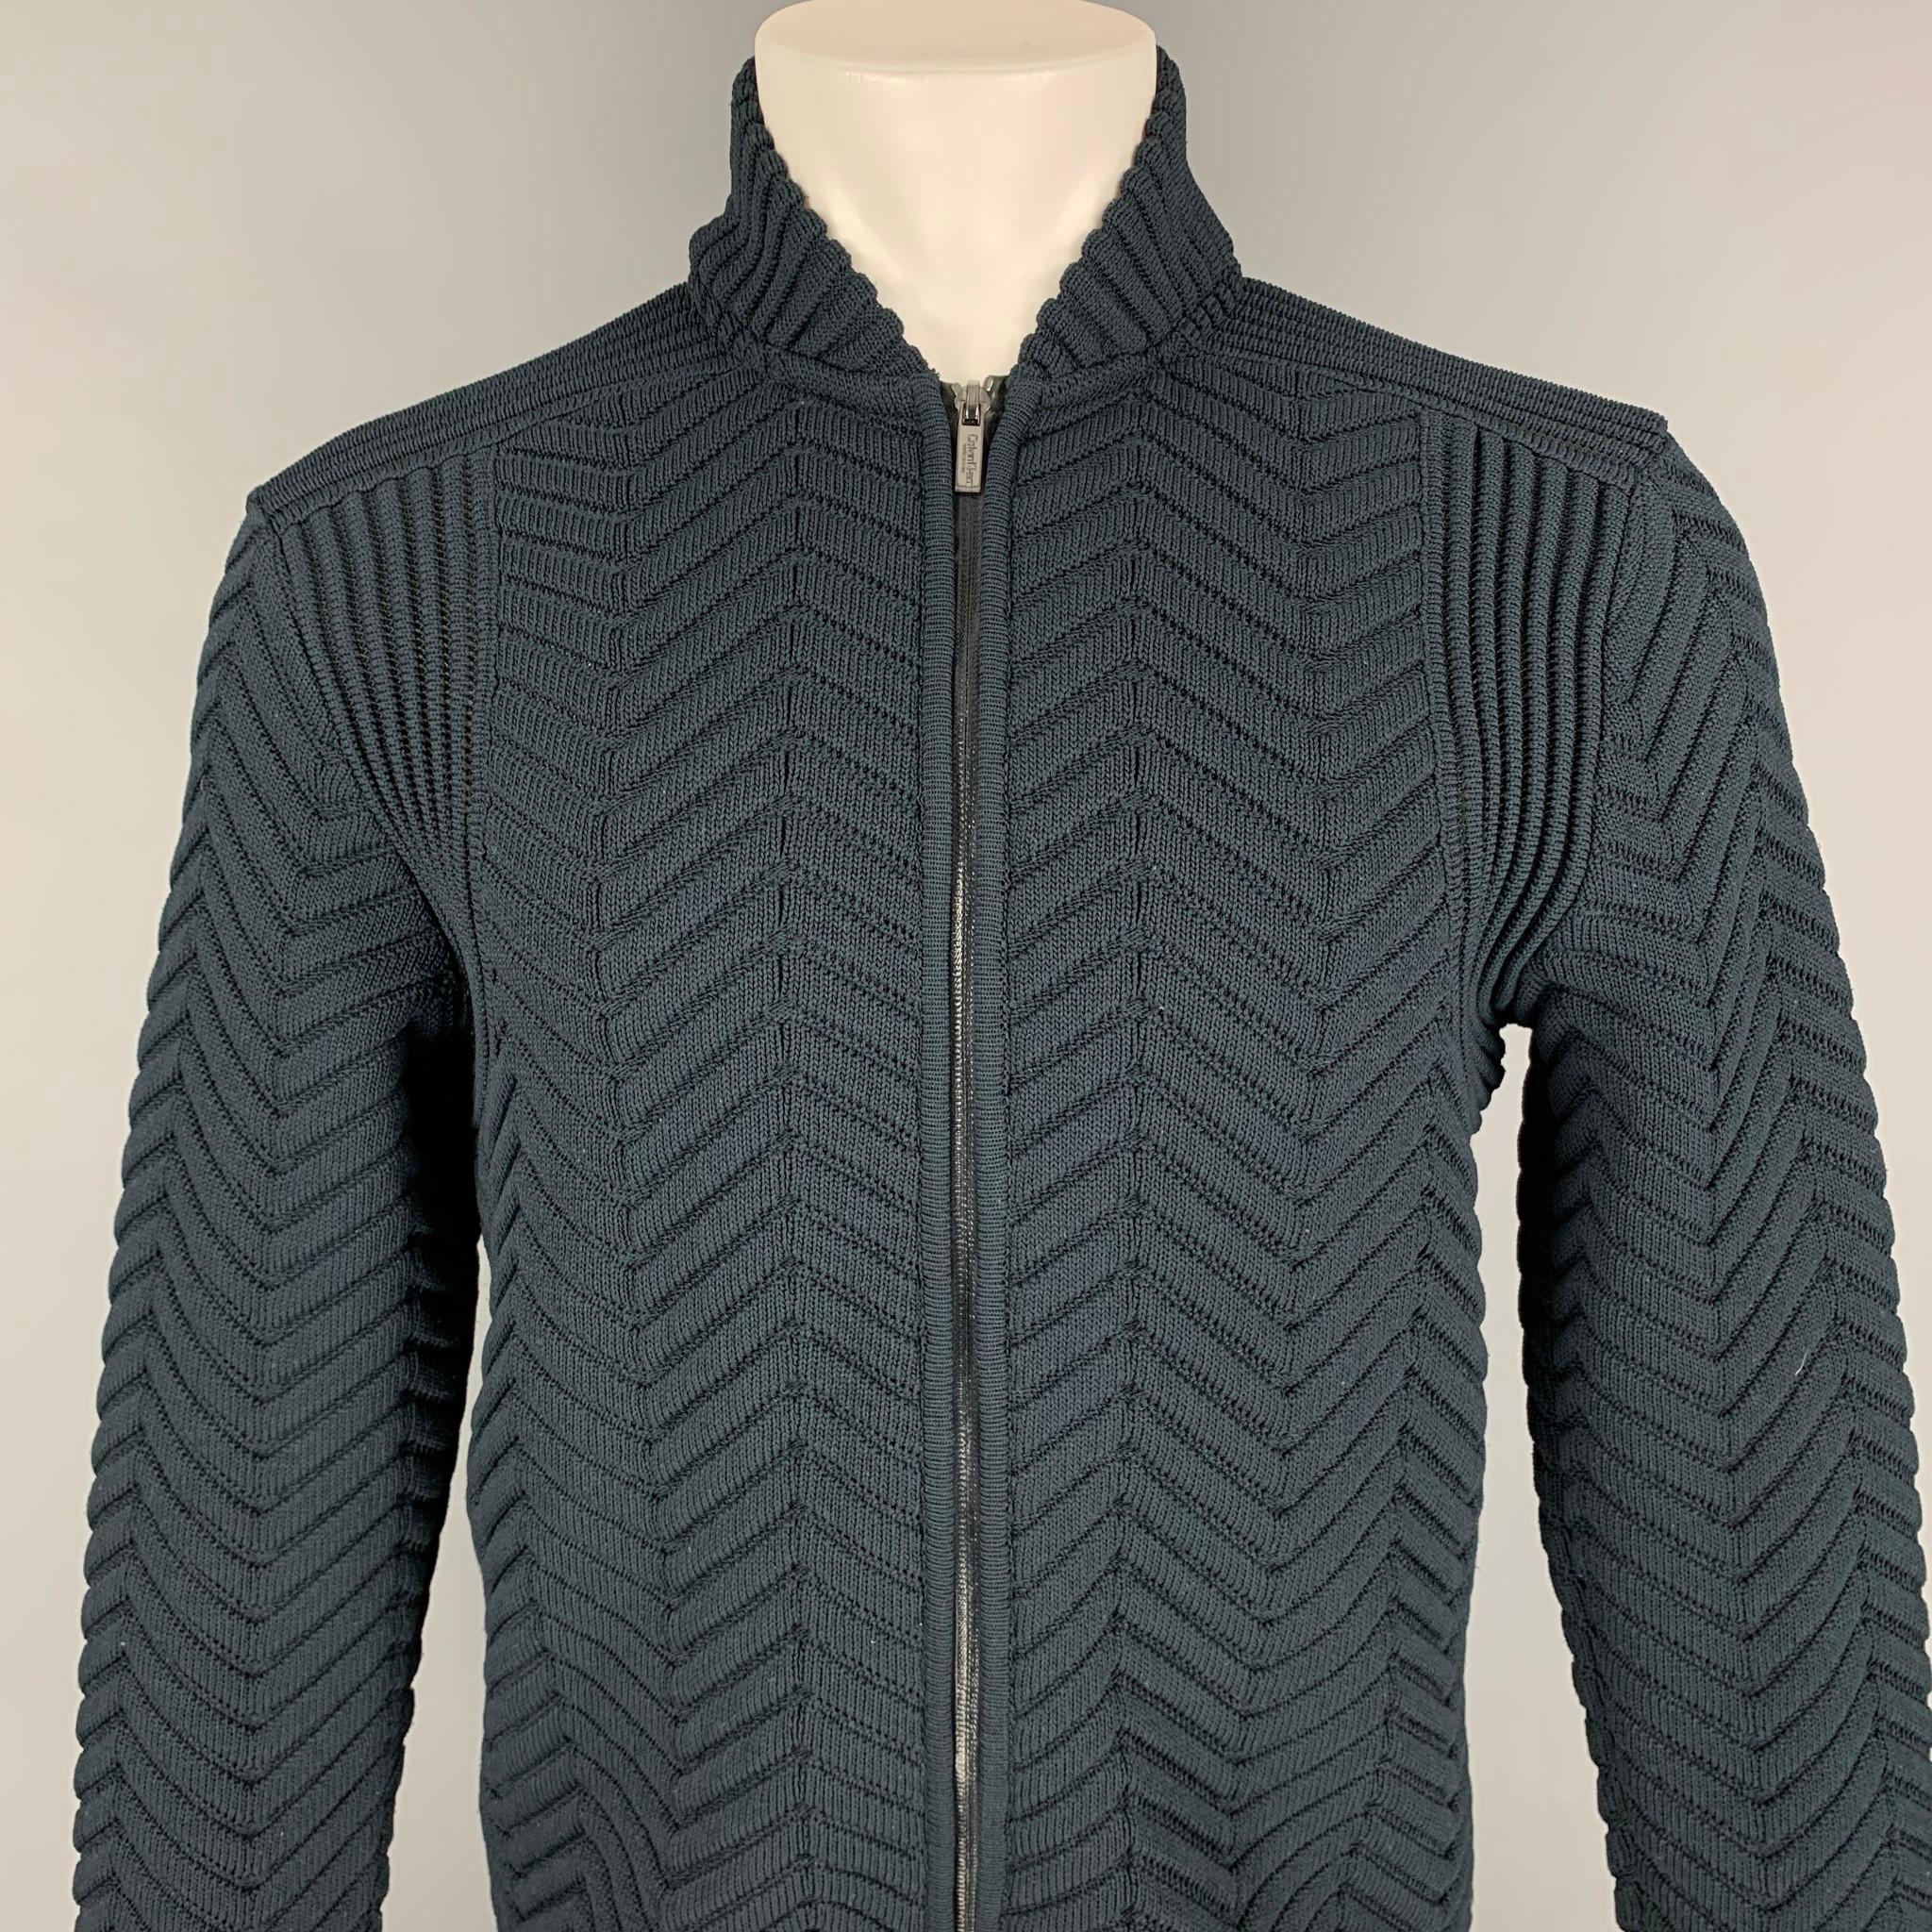 CALVIN KLEIN COLLECTION jacket comes in a navy knitted polyester featuring a stand up collar and a full zip up closure. Made in Italy. 

Very Good Pre-Owned Condition.
Marked: M

Measurements:

Shoulder: 18 in.
Chest: 38 in.
Sleeve: 29 in.
Length: